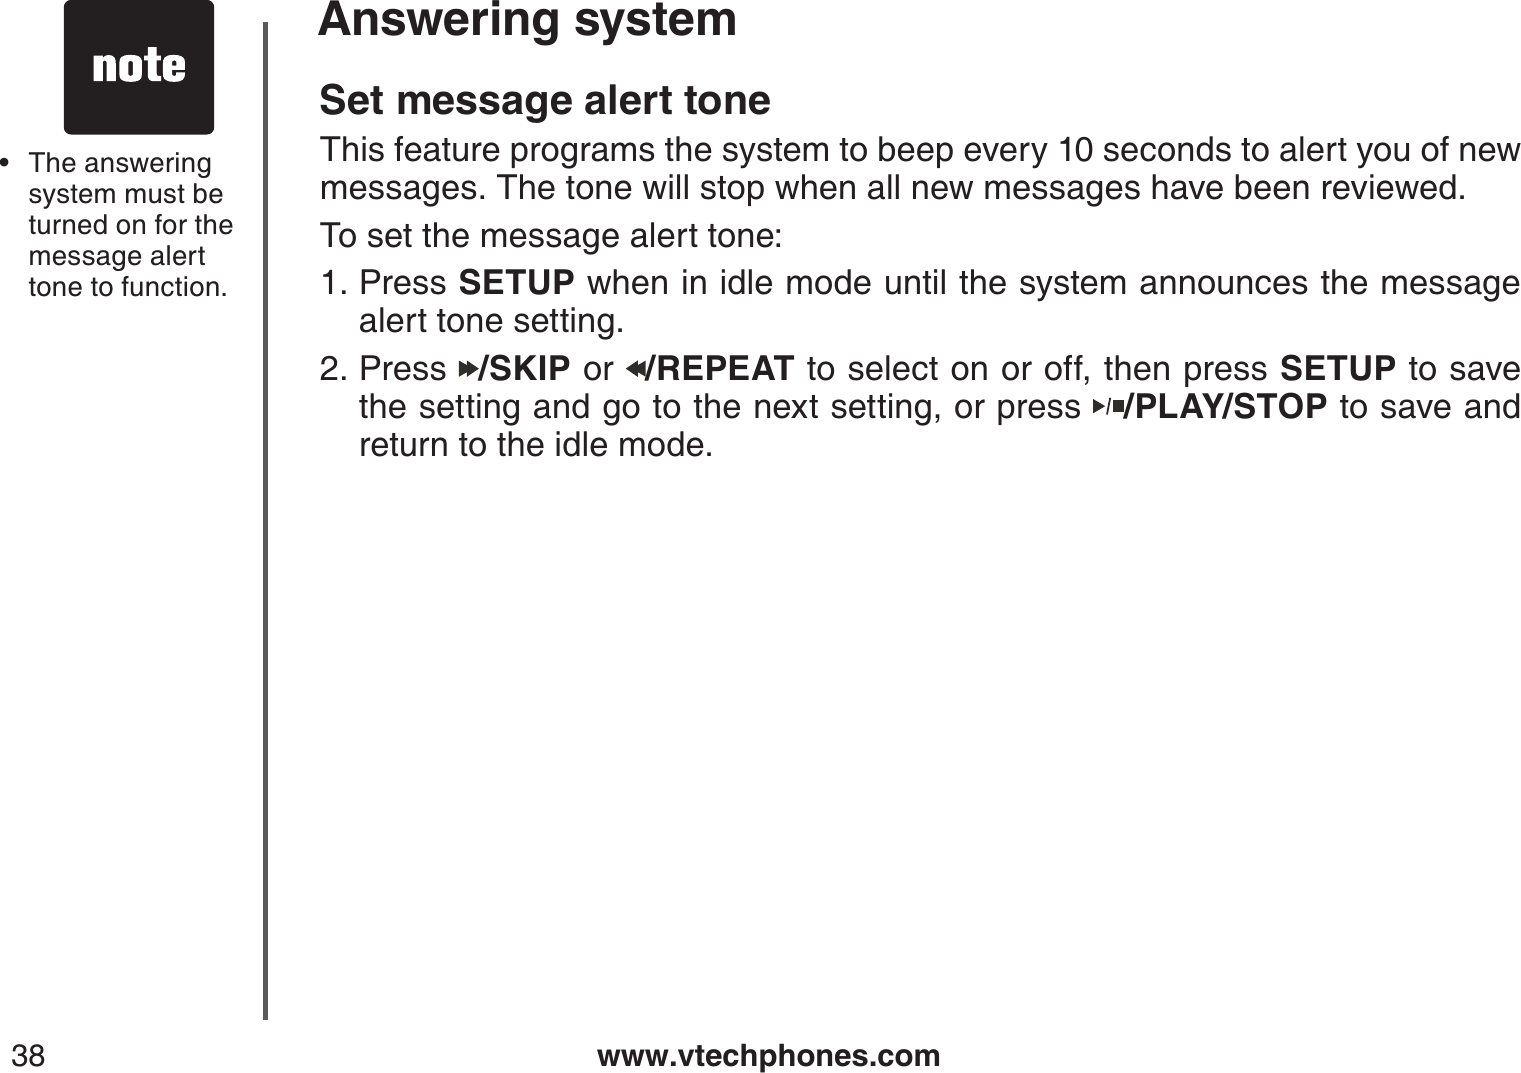 www.vtechphones.com38Answering systemSet message alert toneThis feature programs the system to beep every 10 seconds to alert you of new messages. The tone will stop when all new messages have been reviewed.To set the message alert tone:Press SETUP when in idle mode until the system announces the message alert tone setting.Press  /SKIP or  /REPEAT to select on or off, then press SETUP to save the setting and go to the next setting, or press  /PLAY/STOP to save and return to the idle mode.1.2.The answering system must be turned on for the message alert tone to function. •